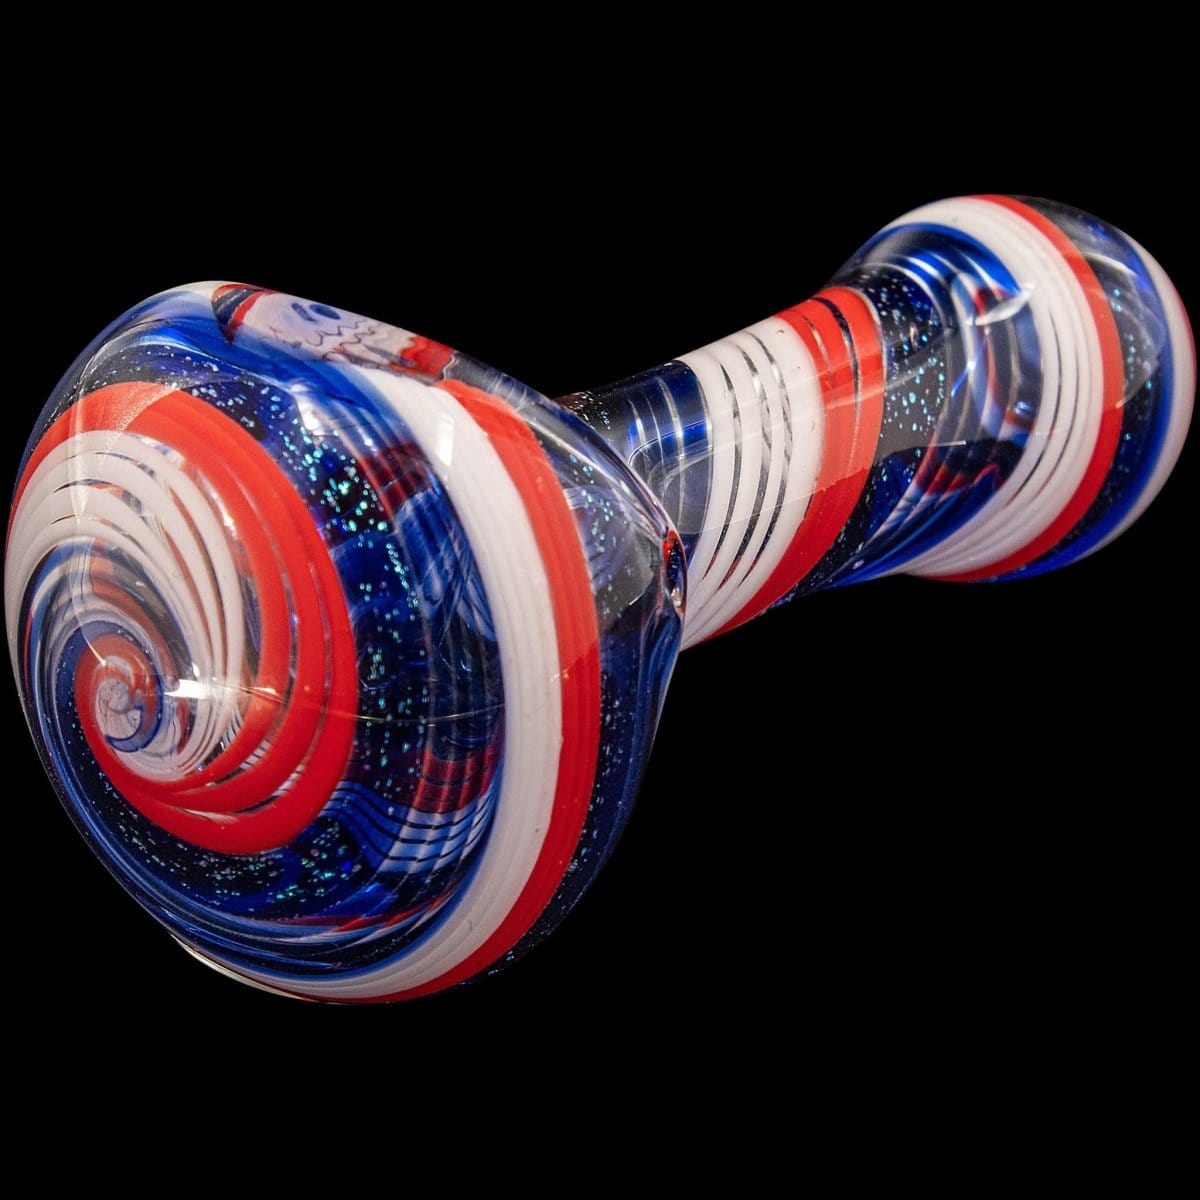 LA Pipes Hand Pipe "Stars and Stripes" Glass Spoon Pipe